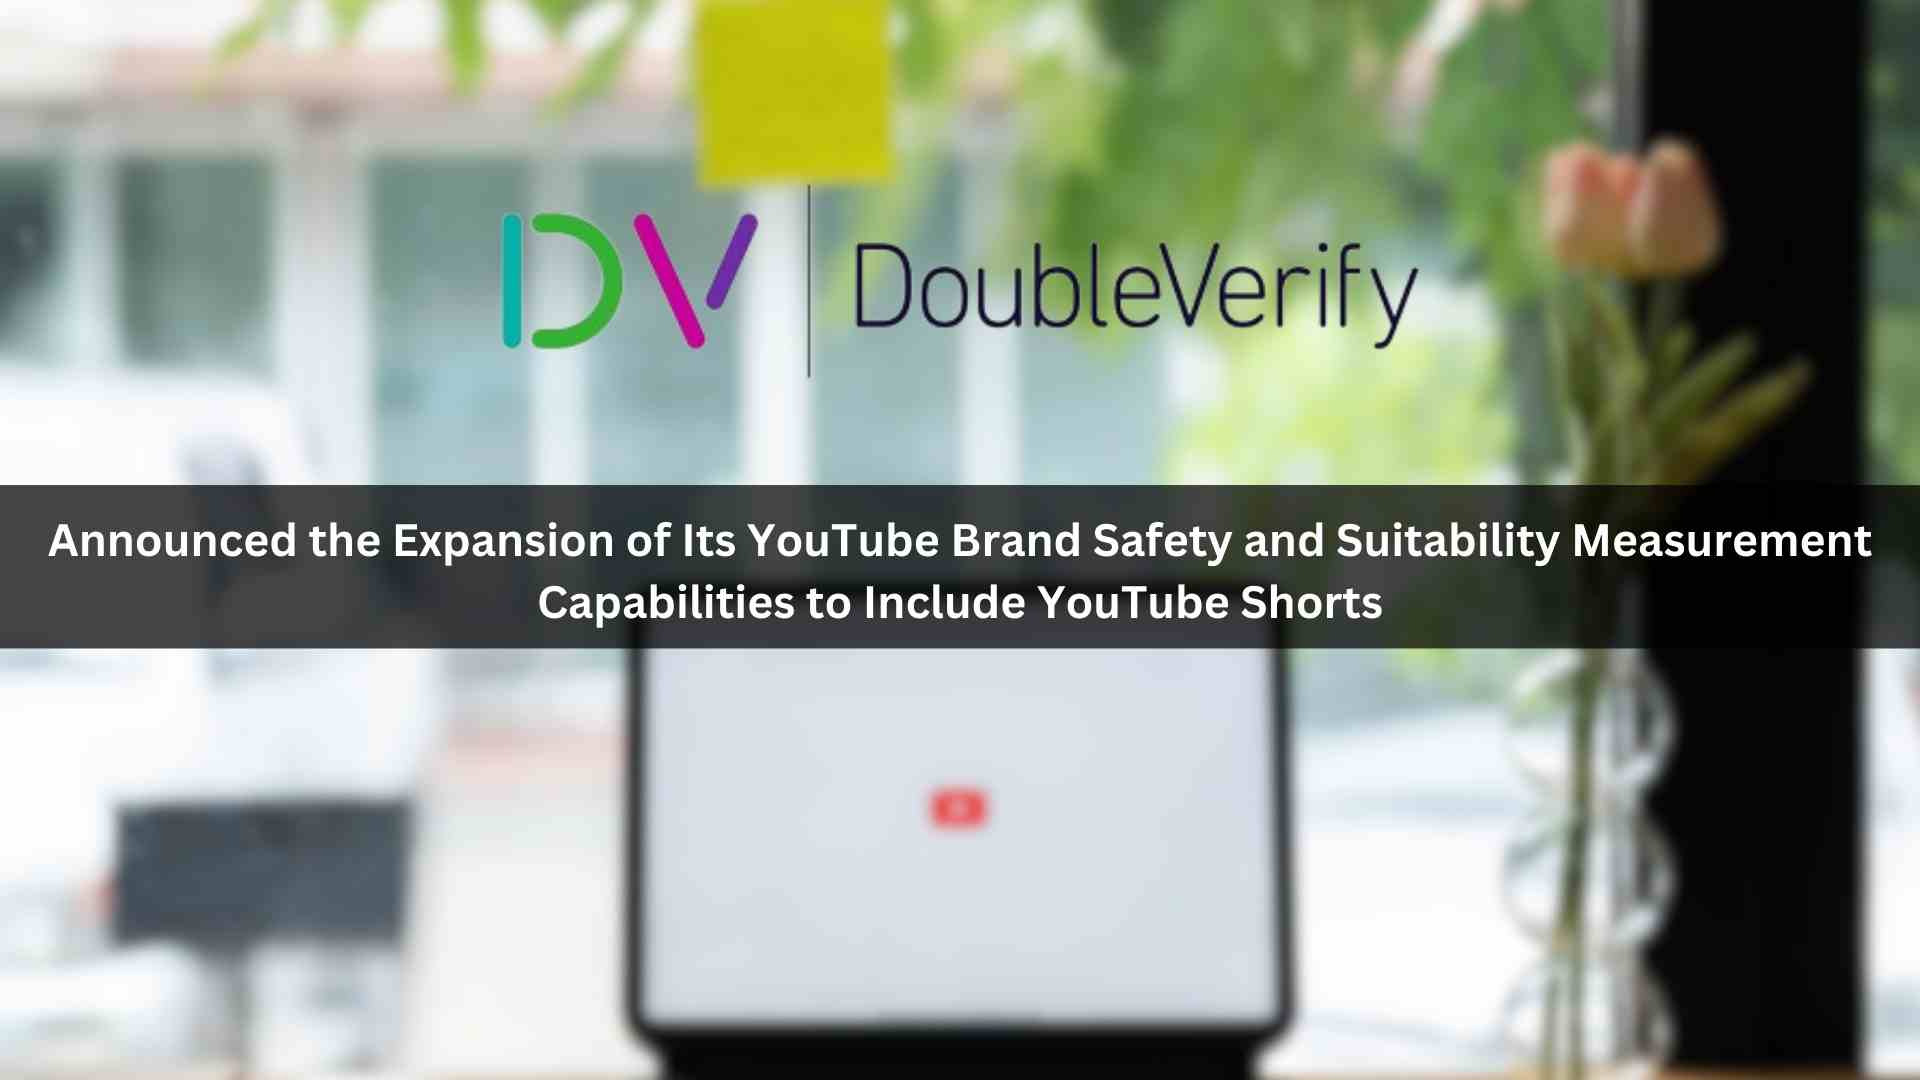 DoubleVerify Expands Brand Safety and Suitability Measurement to YouTube Shorts